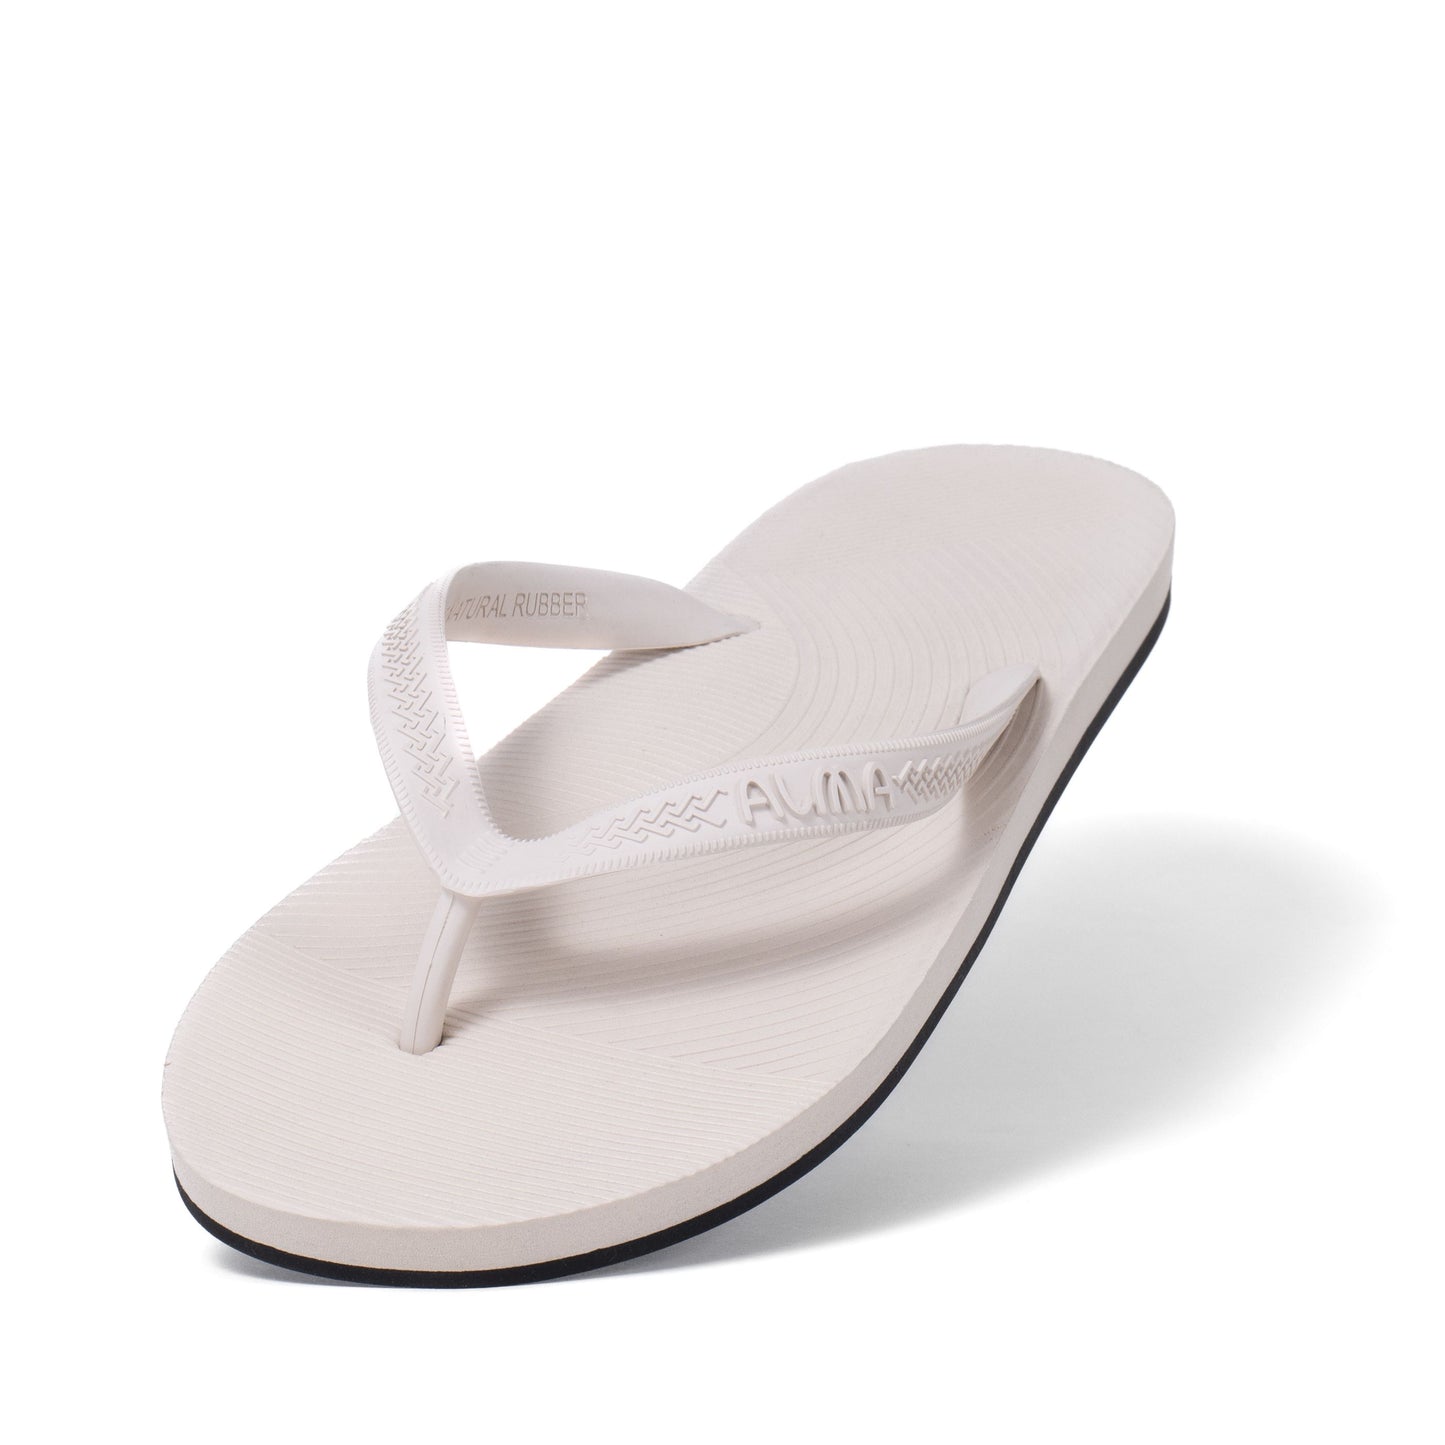 Women's Recycled Tire Sole Flip Flop - Pearl